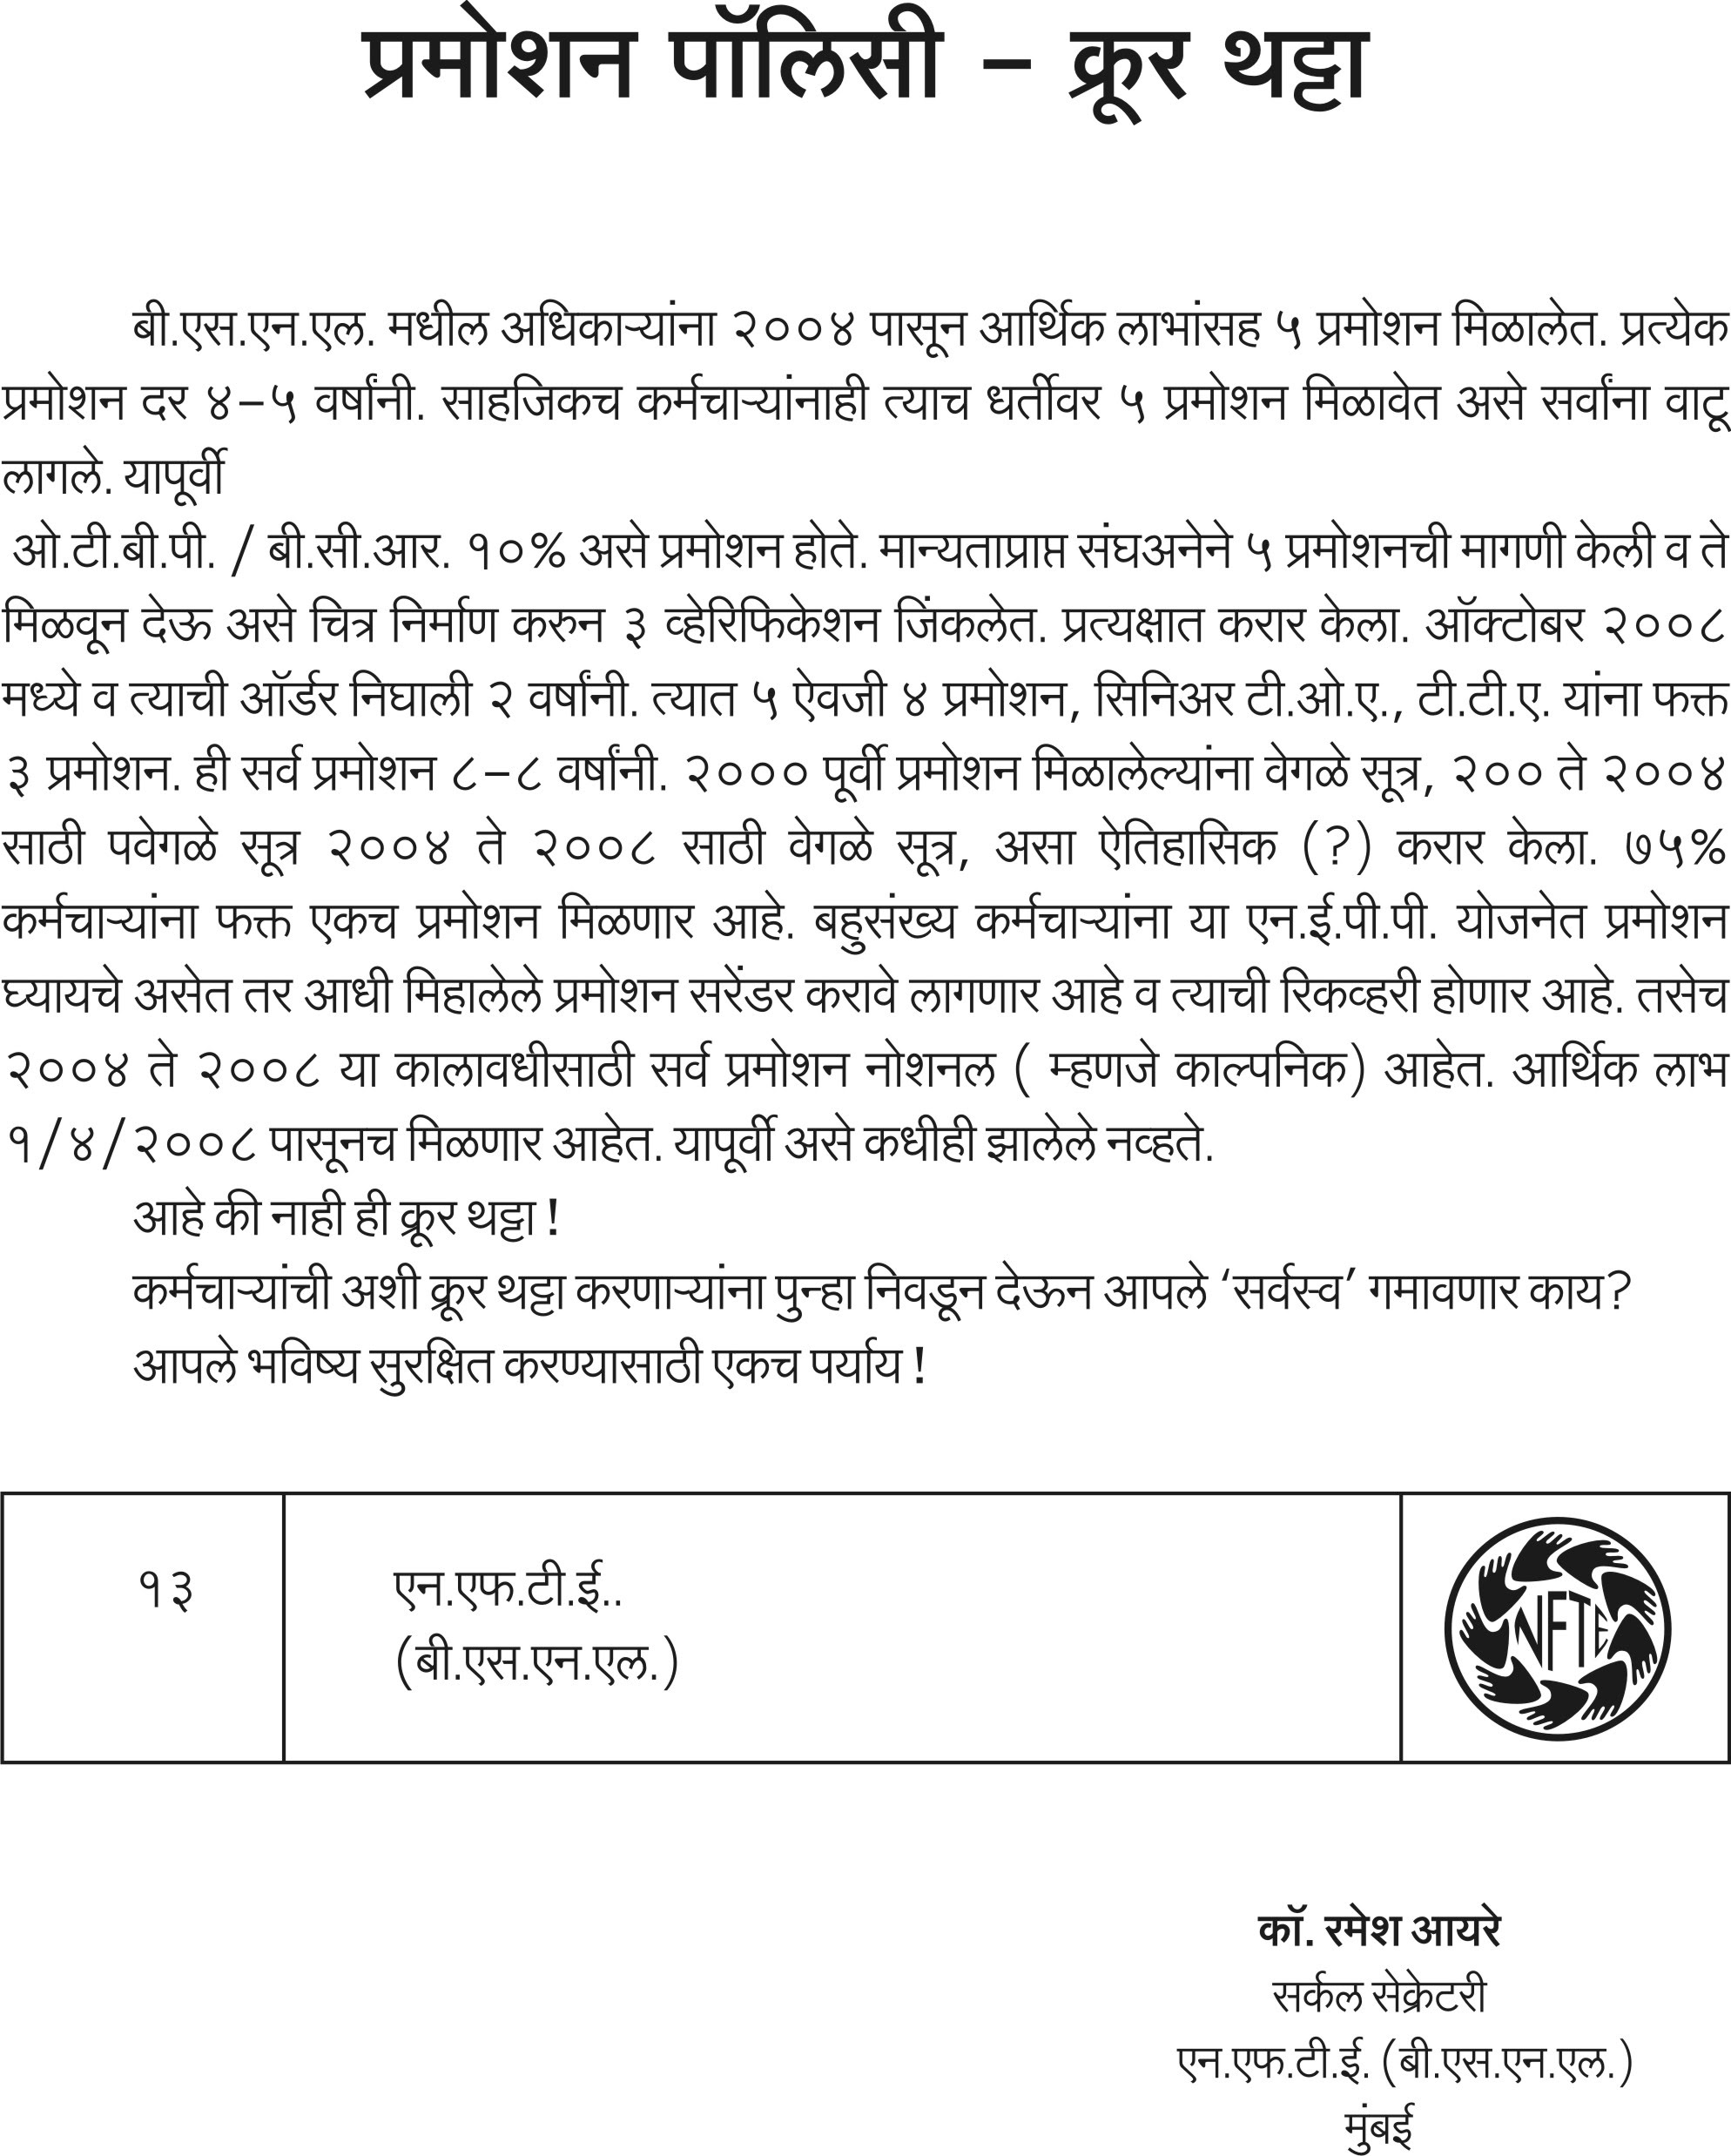 application letter in marathi meaning